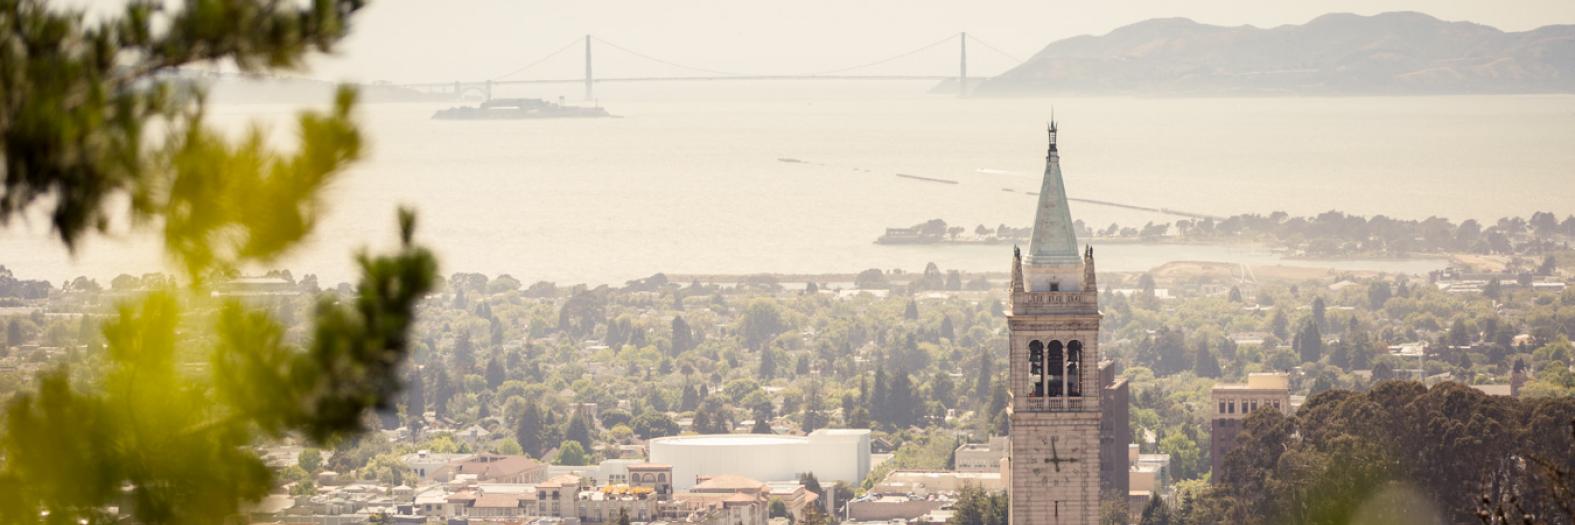 View of bay and campus, campanile